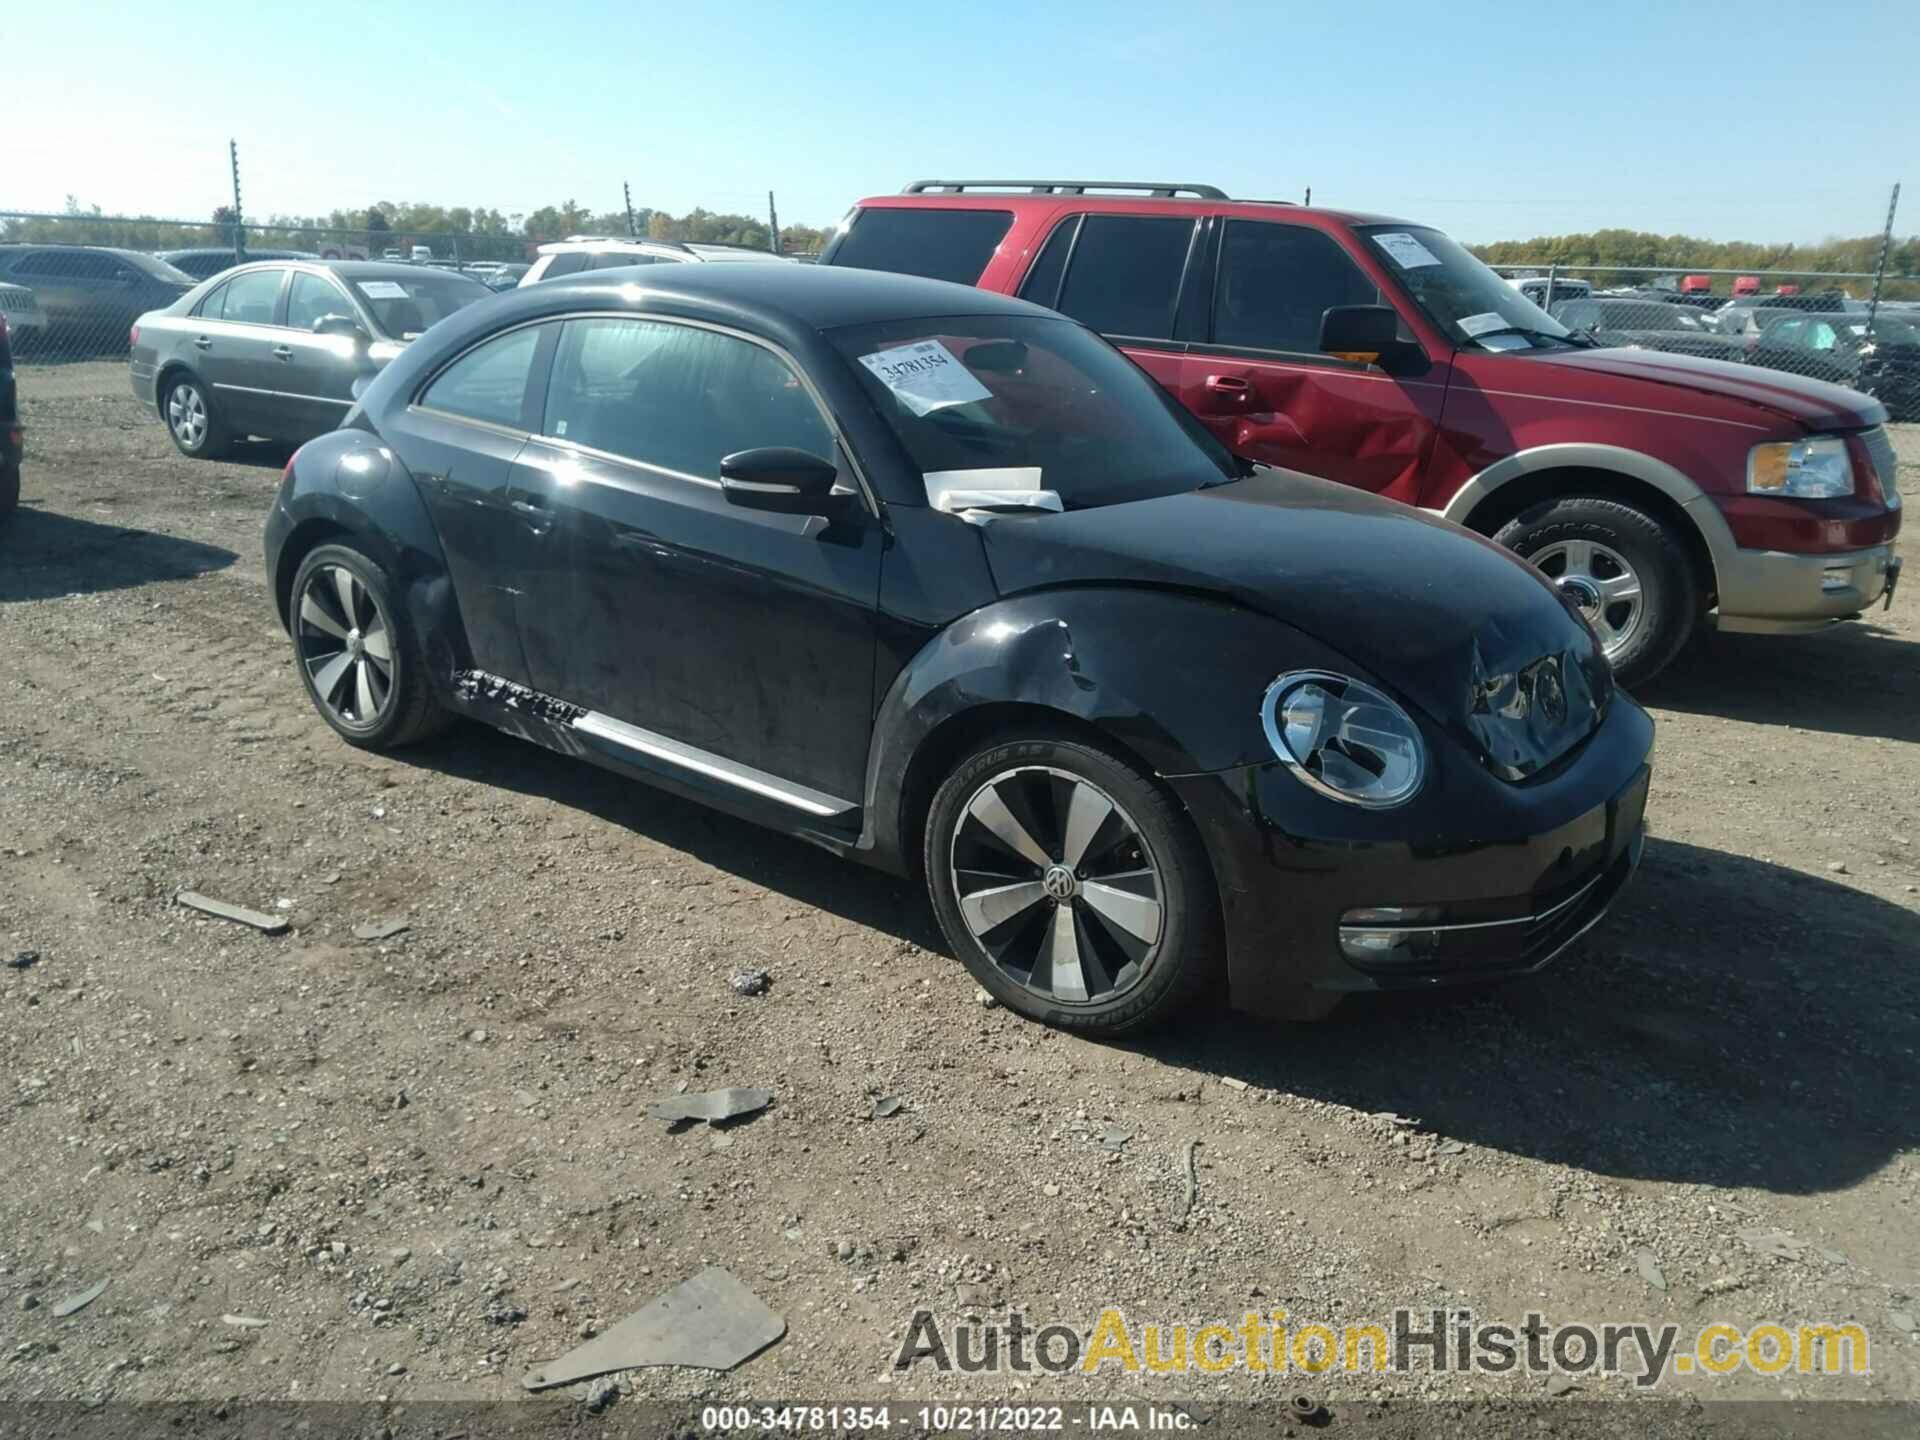 VOLKSWAGEN BEETLE 2.0T TURBO PZEV, 3VW4A7AT0CM641731